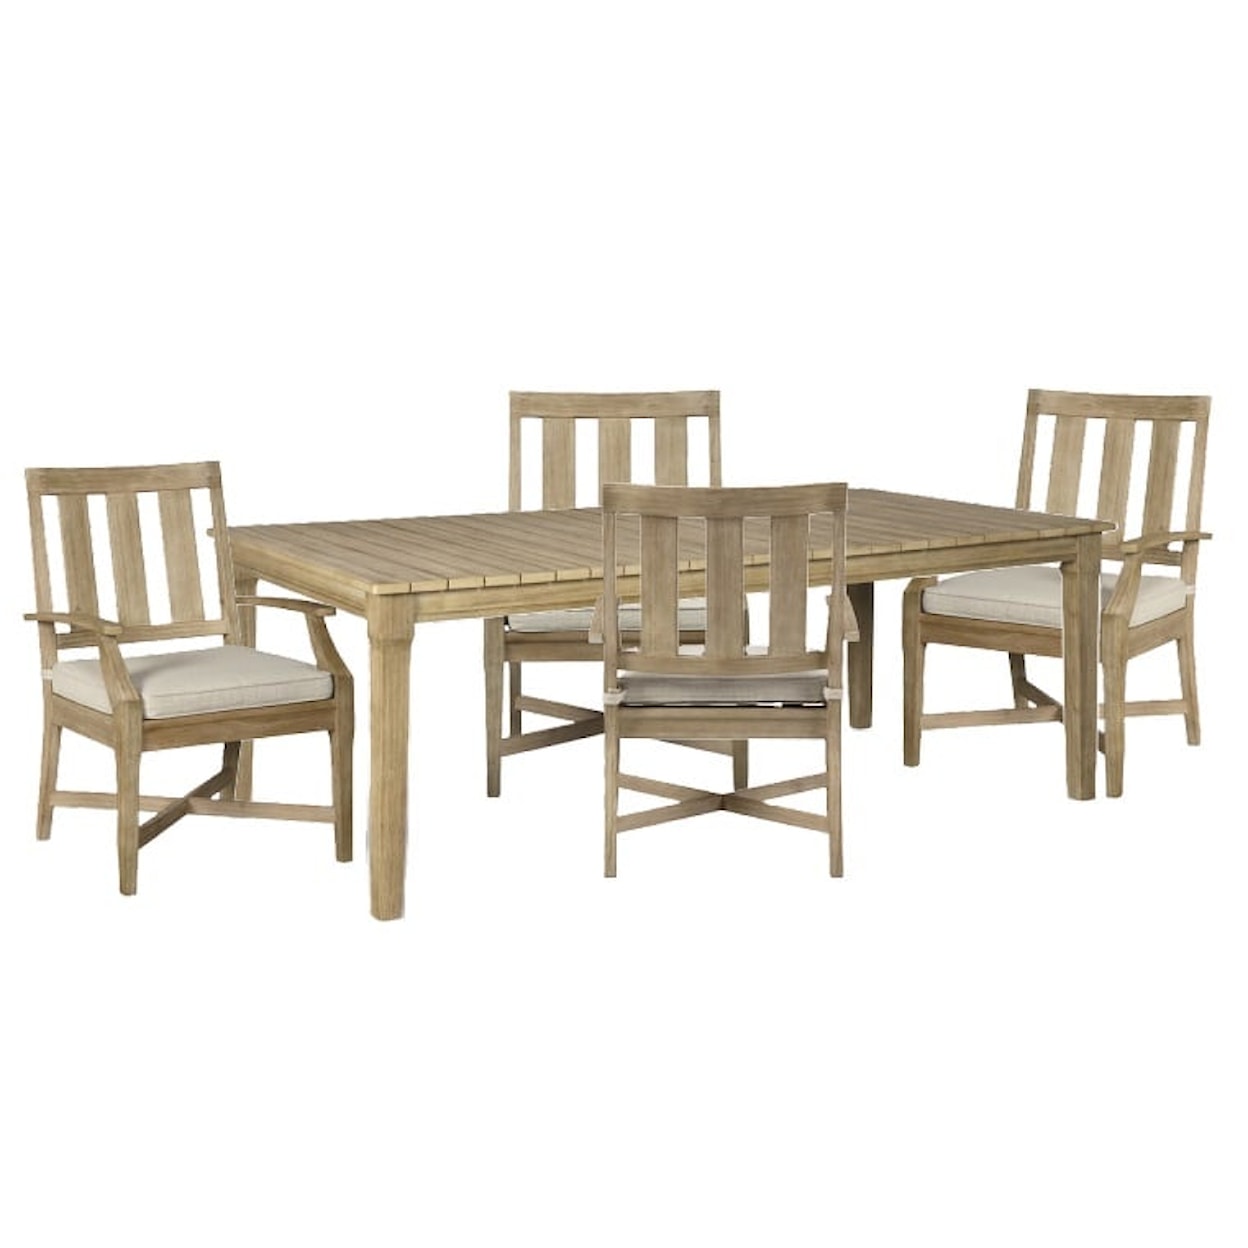 Signature Design by Ashley Clare View Table w/4 Arm Chairs